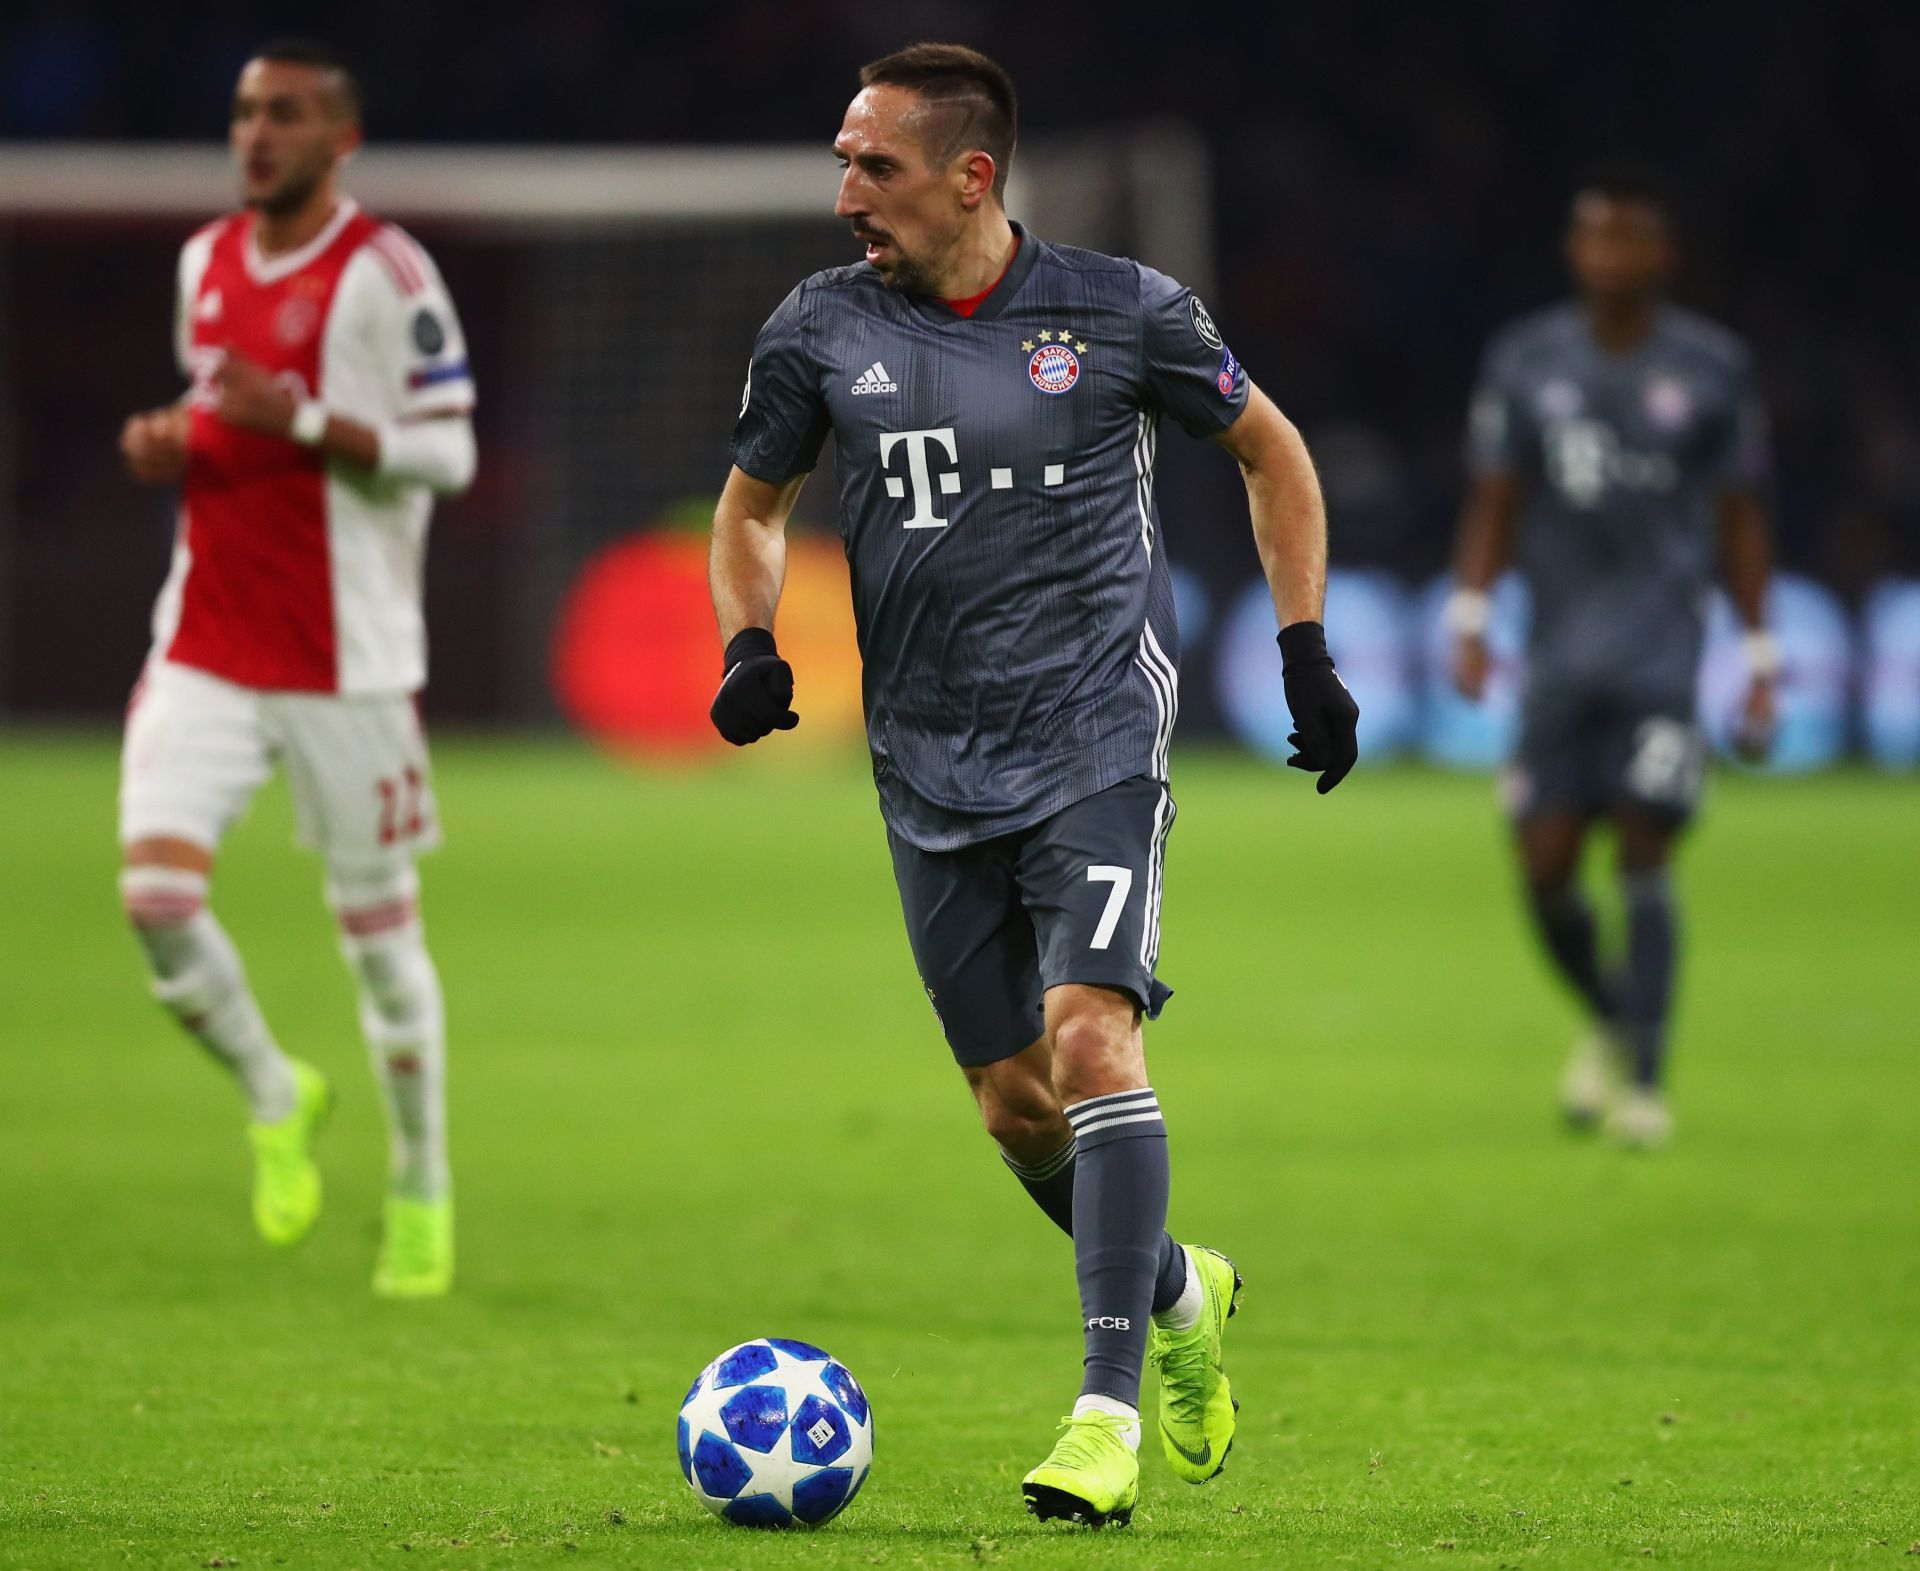 Ribery has scored 425 games across all competitions for Bayern Munich